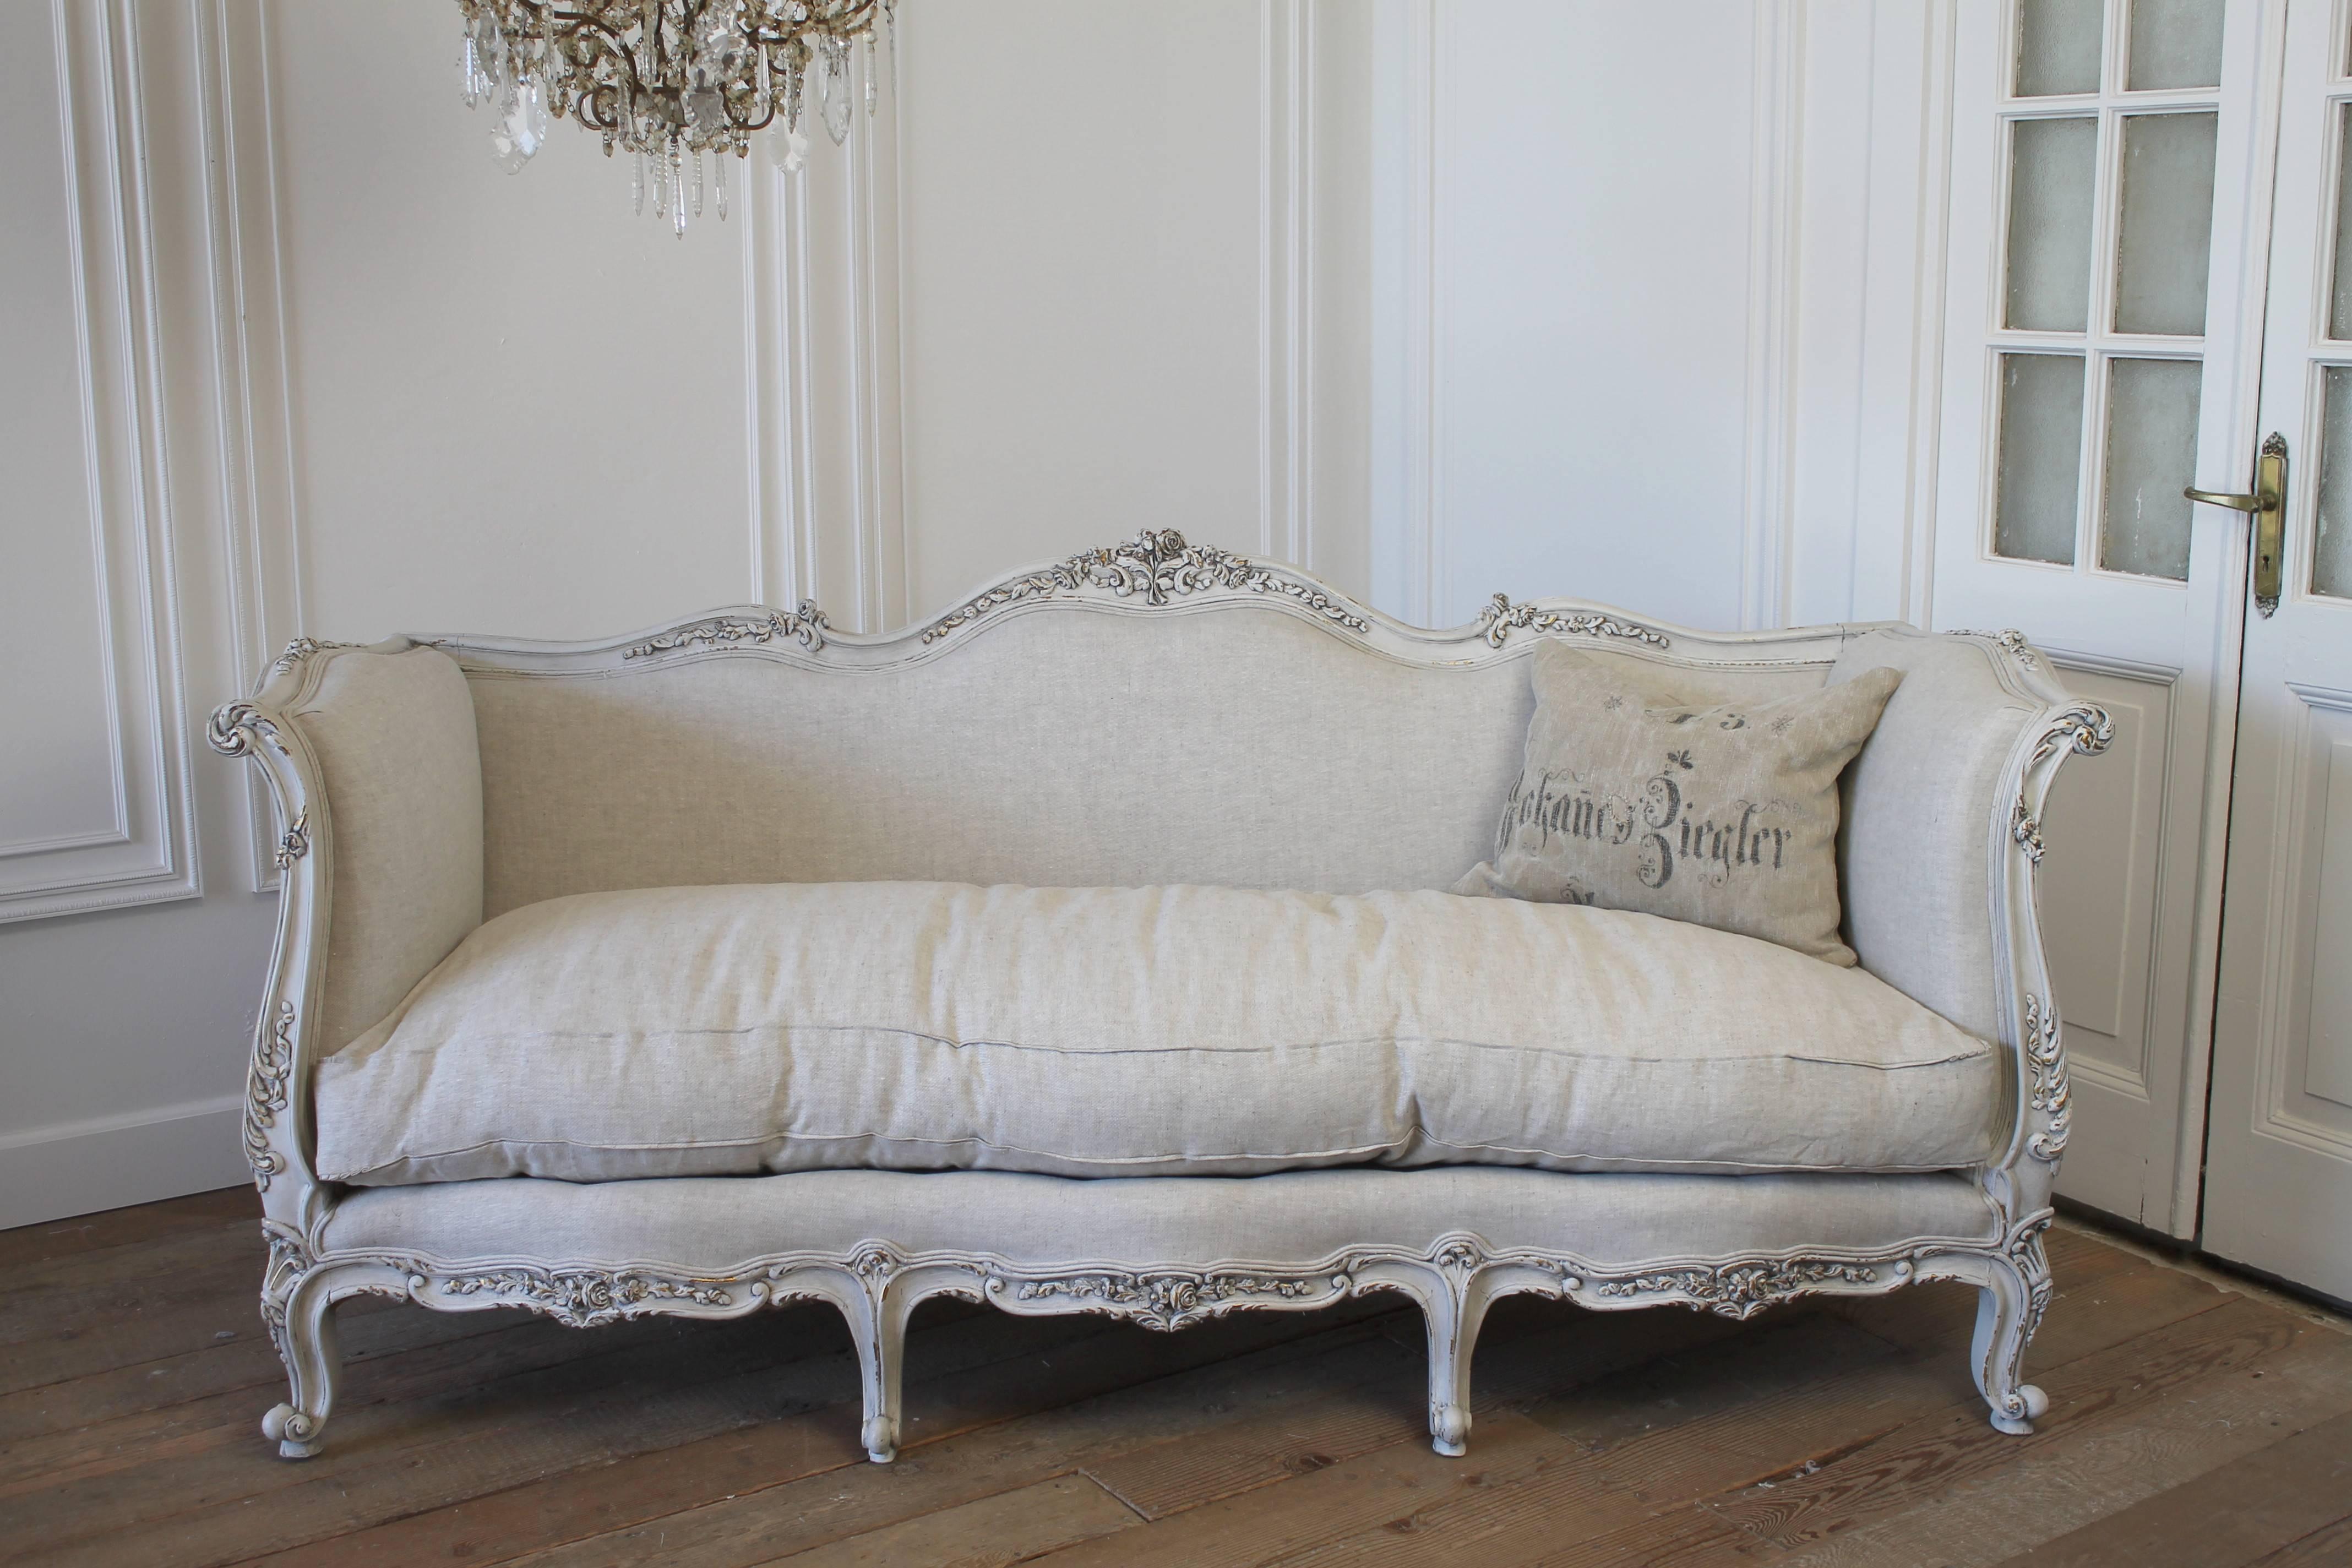 The sofa has been painted in a soft oyster white color with some of the gilt peeking through. The finish has been given an aged waxed to give the appearance of an original patina. The sofa has been reupholstered in a 15oz Belgian linen, the color is